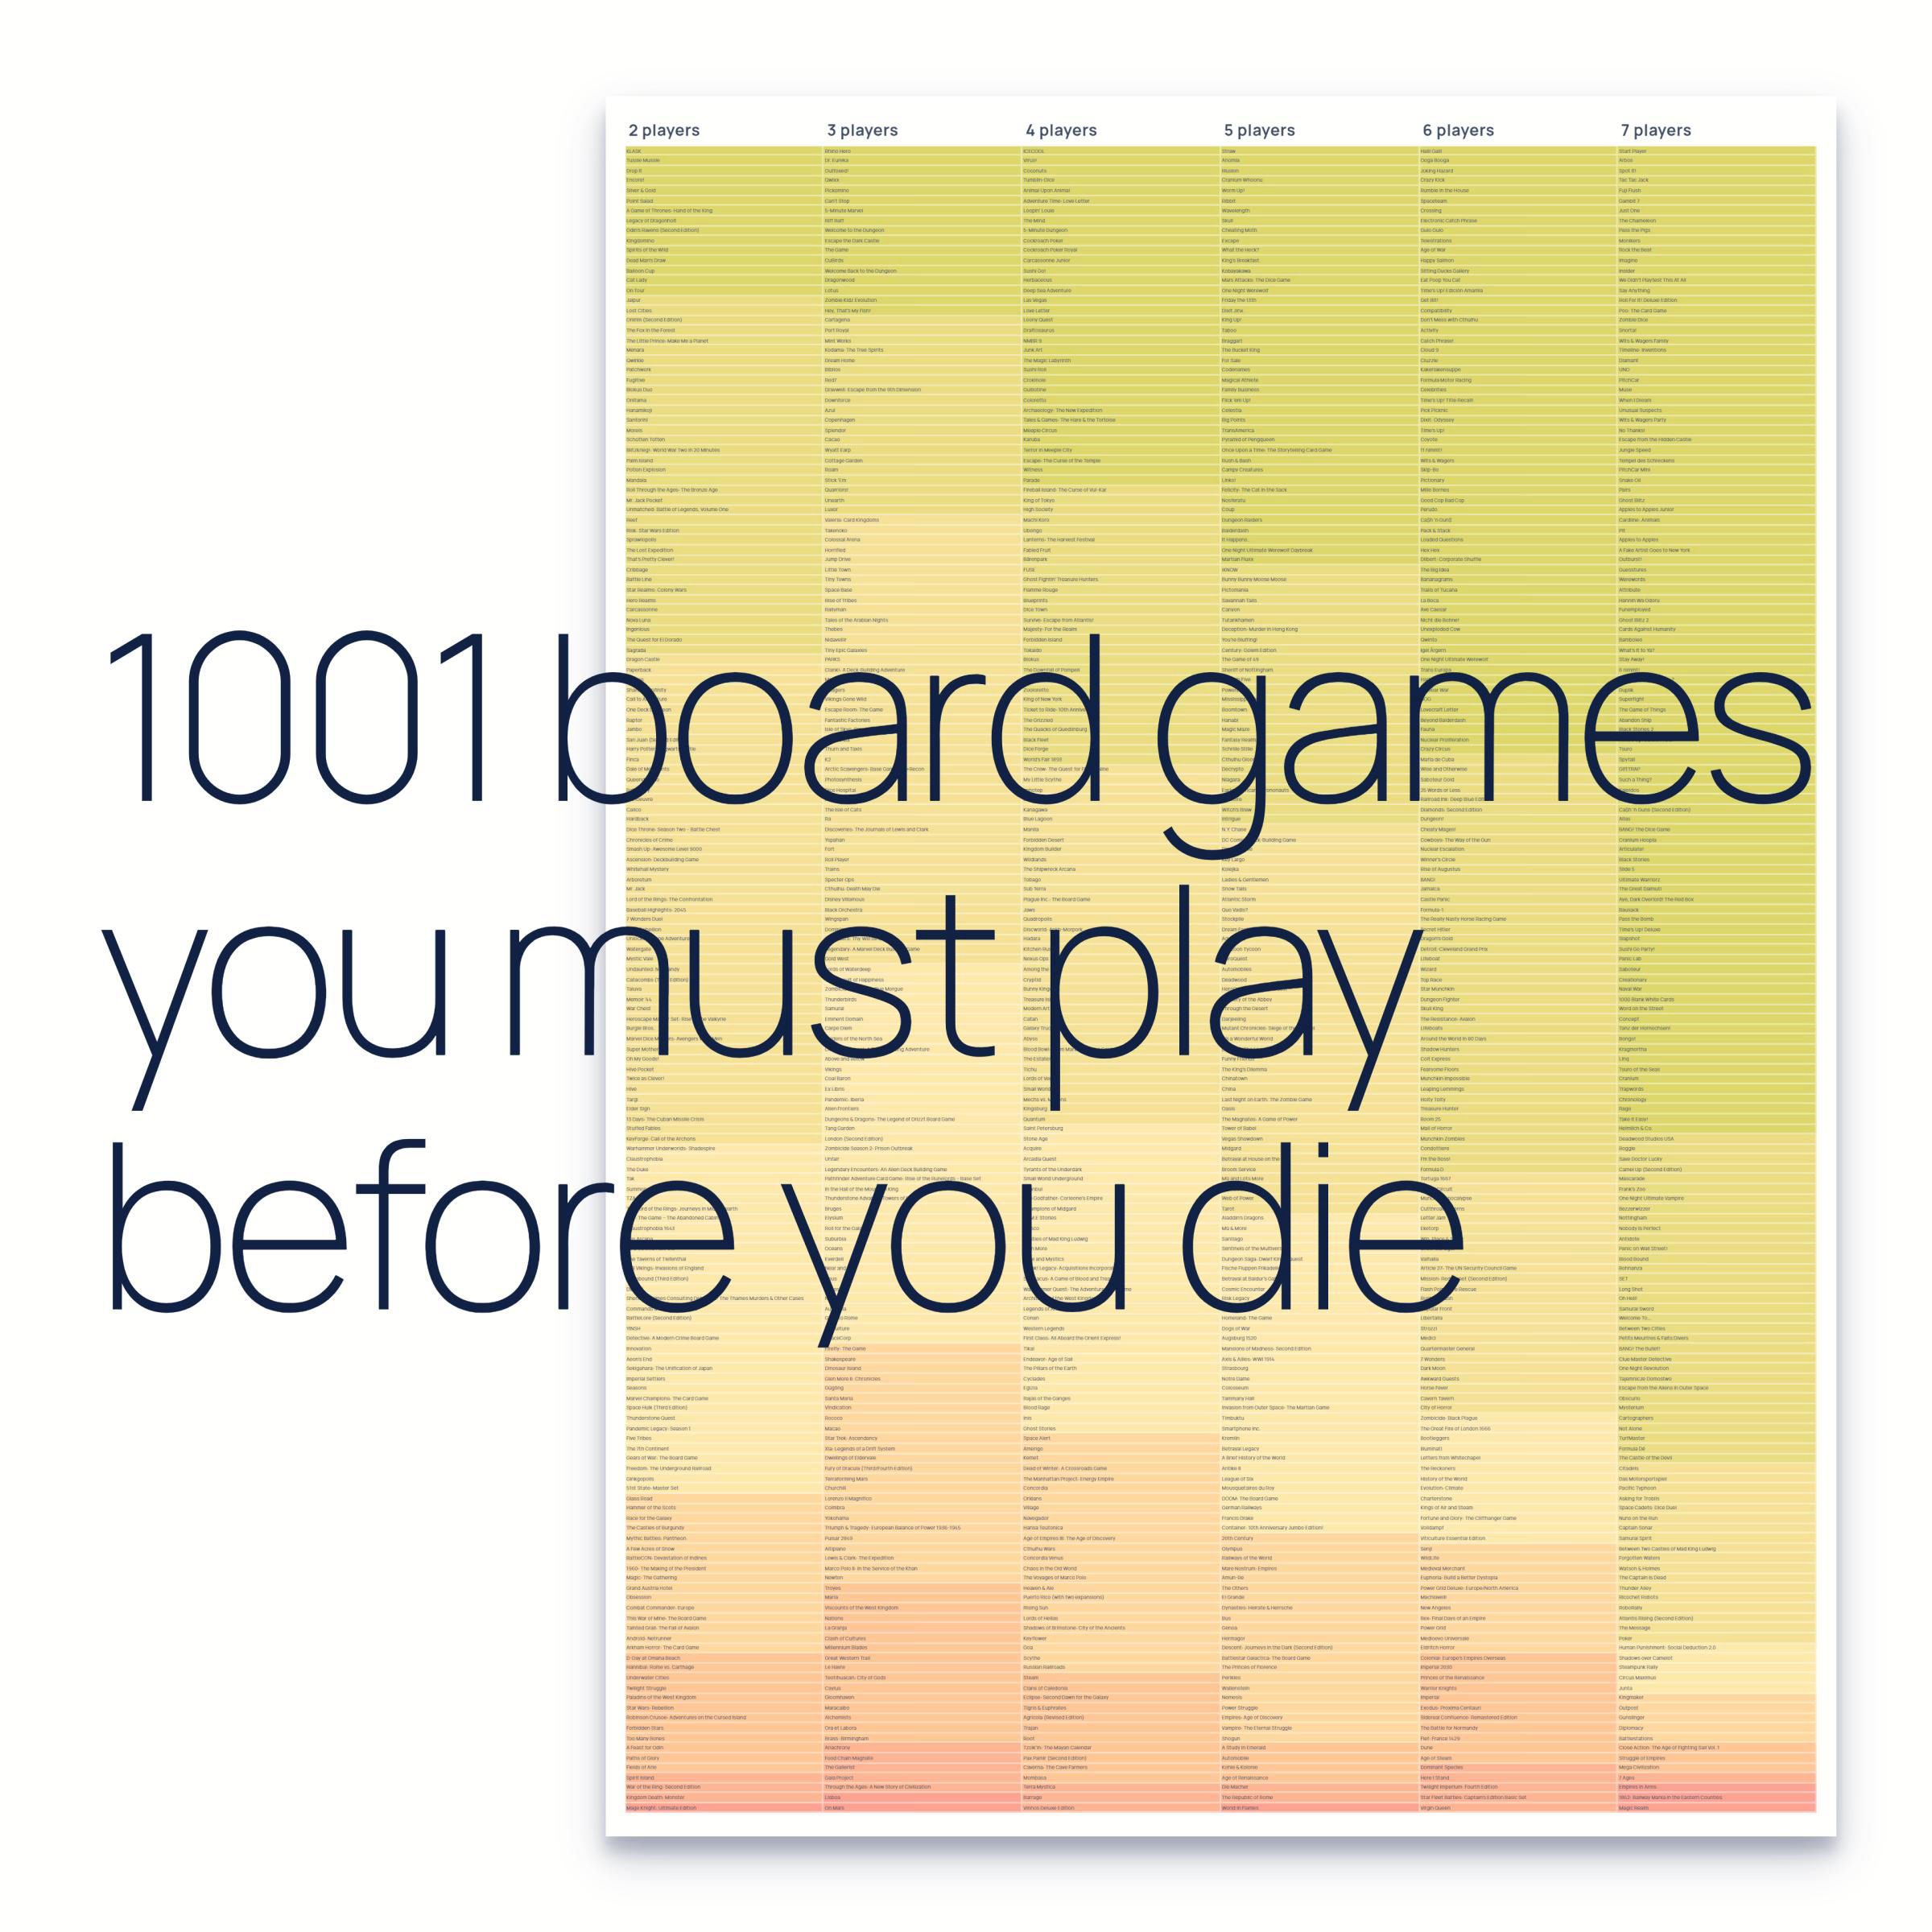 Diagram of best board games, sorted by recommended player count and weight rating